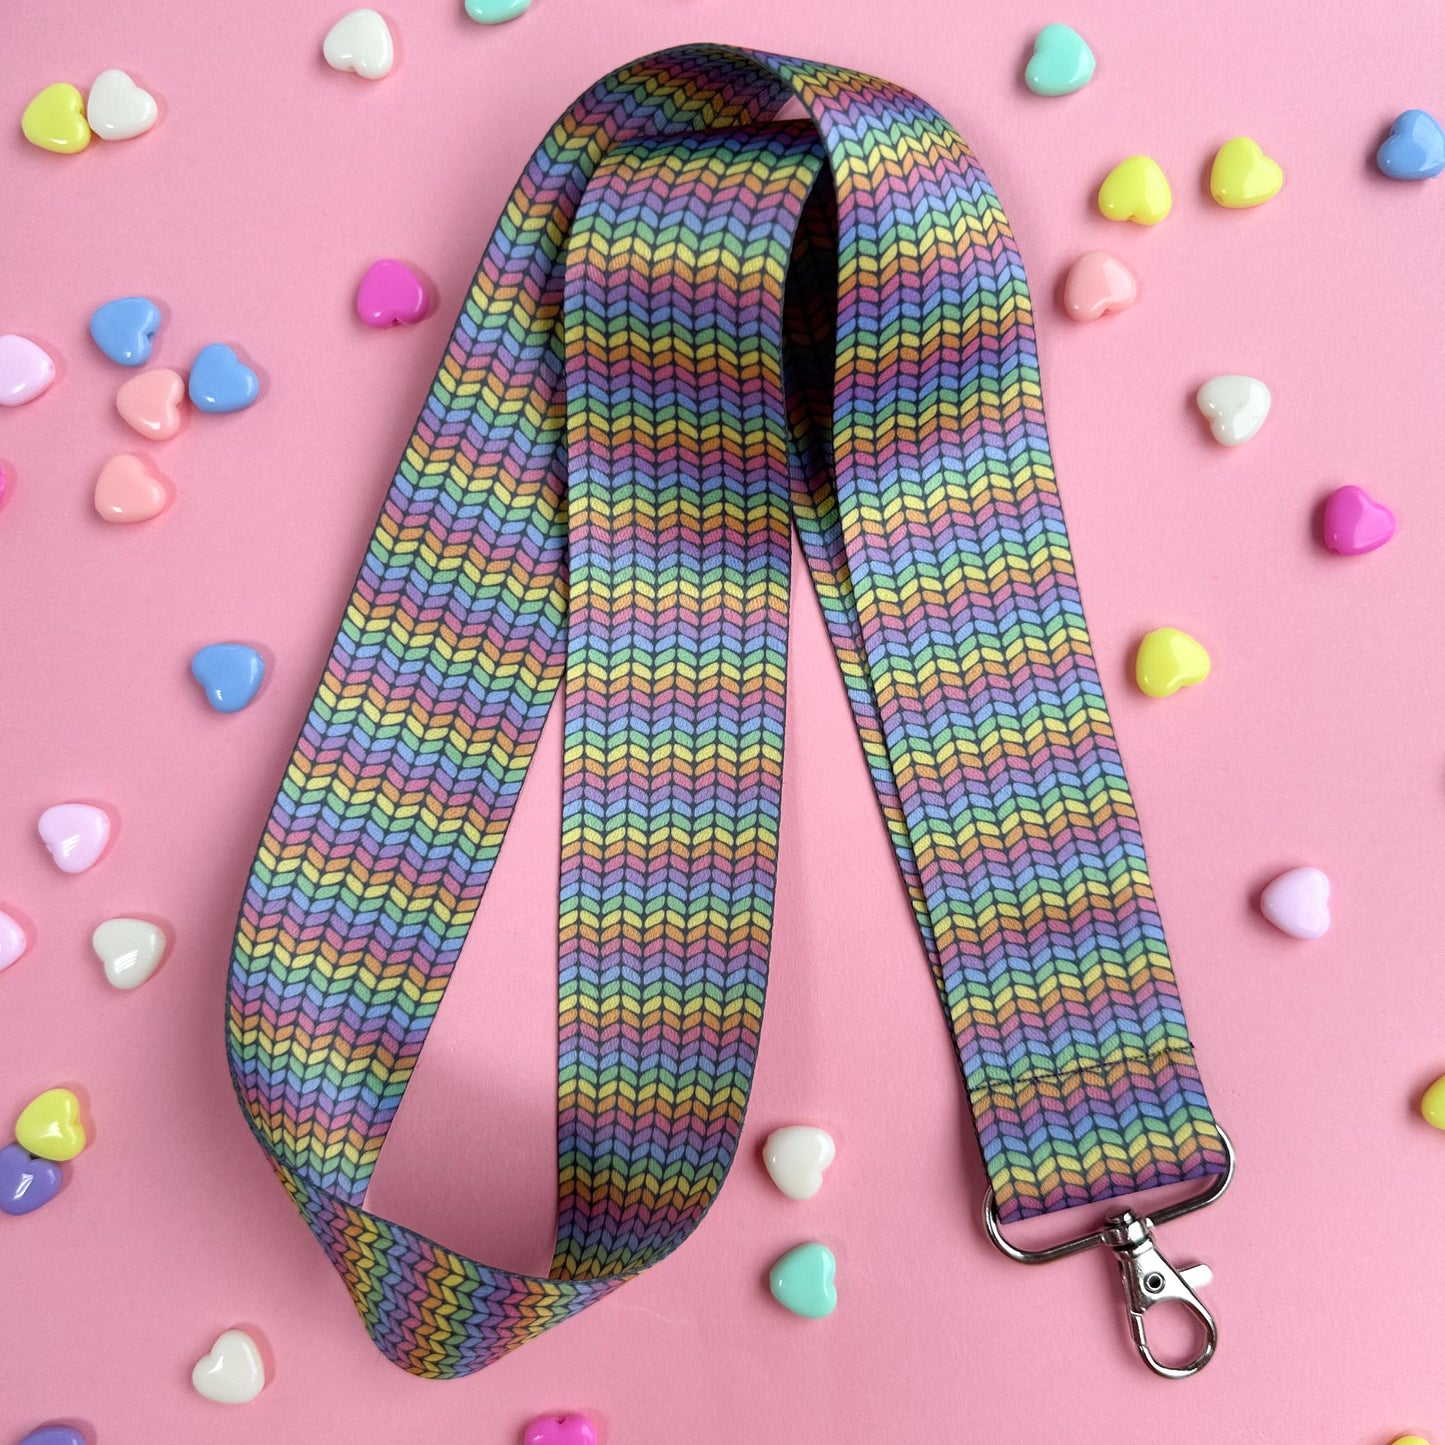 A woven lanyard with a pastel rainbow stockinette stitch graphic printed on it with a silver metal lobster claw clasp at the bottom. The lanyard is bend in half to show how long it is and is on a pink background with pastel heart beads scattered around it. 